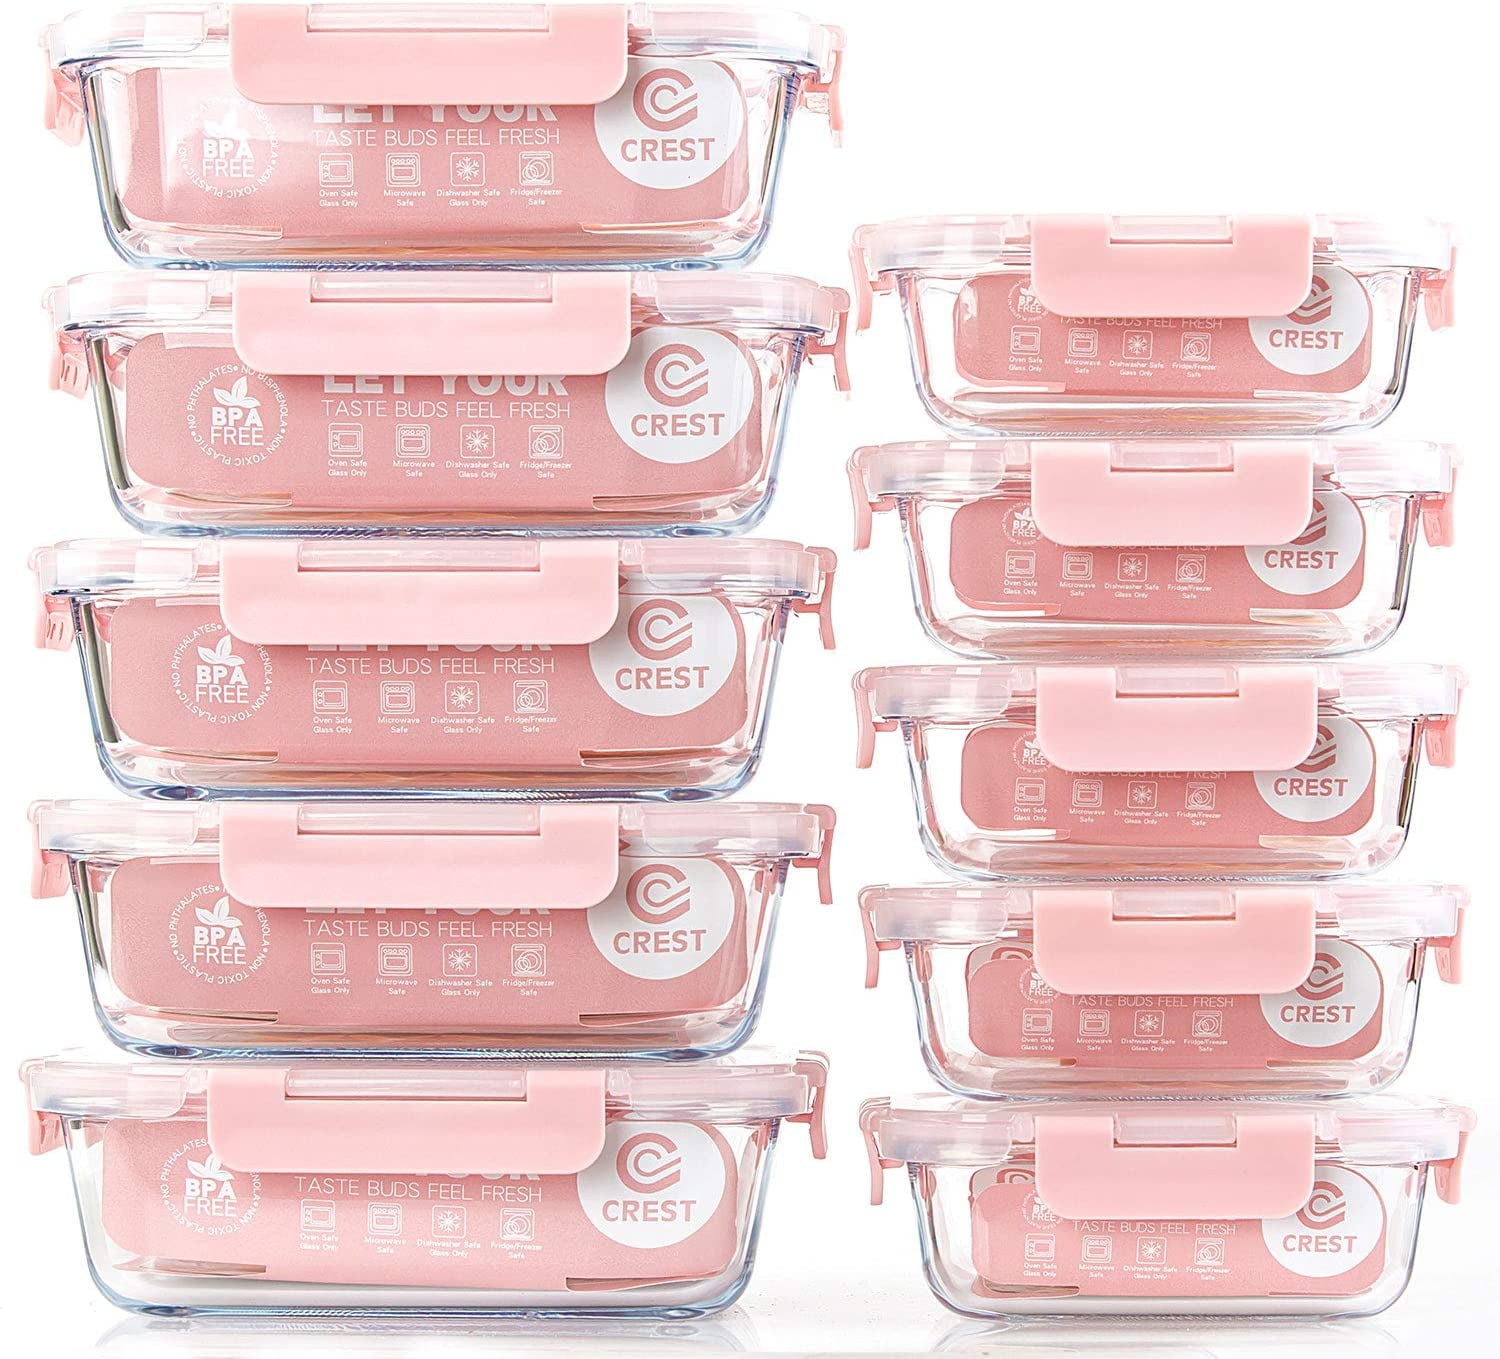 ZRRHOO 10 Pack Glass Meal Prep Containers with Lids, Food Storage  Containers with Built in Vent, Airtight Bento Boxes for Lunch, BPA Free &  Leak Proof